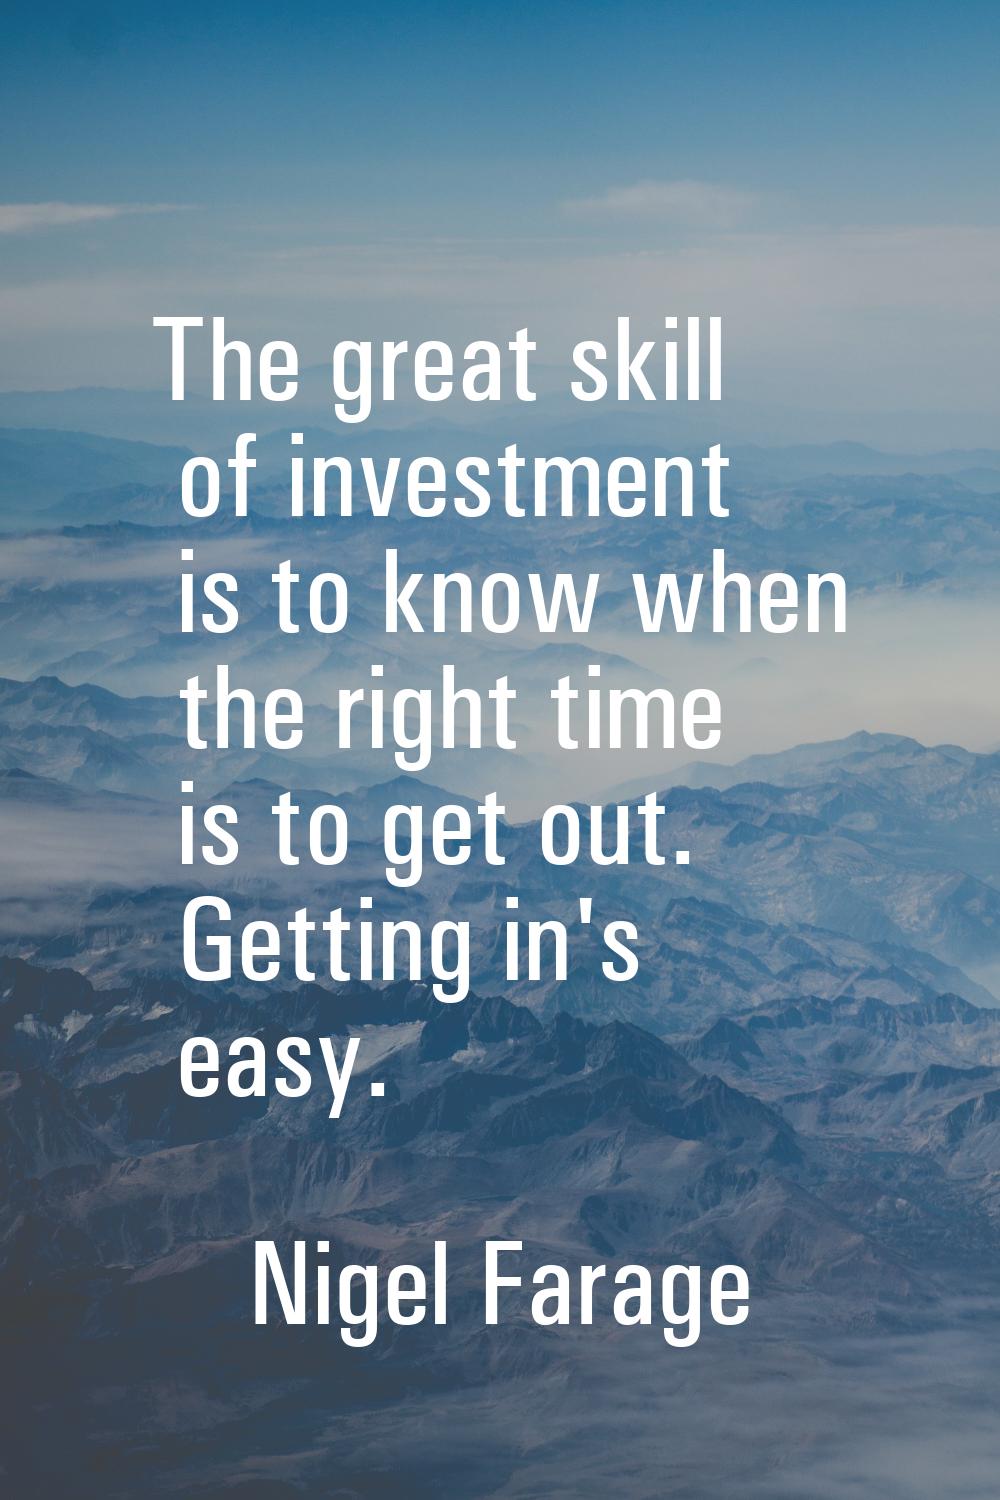 The great skill of investment is to know when the right time is to get out. Getting in's easy.